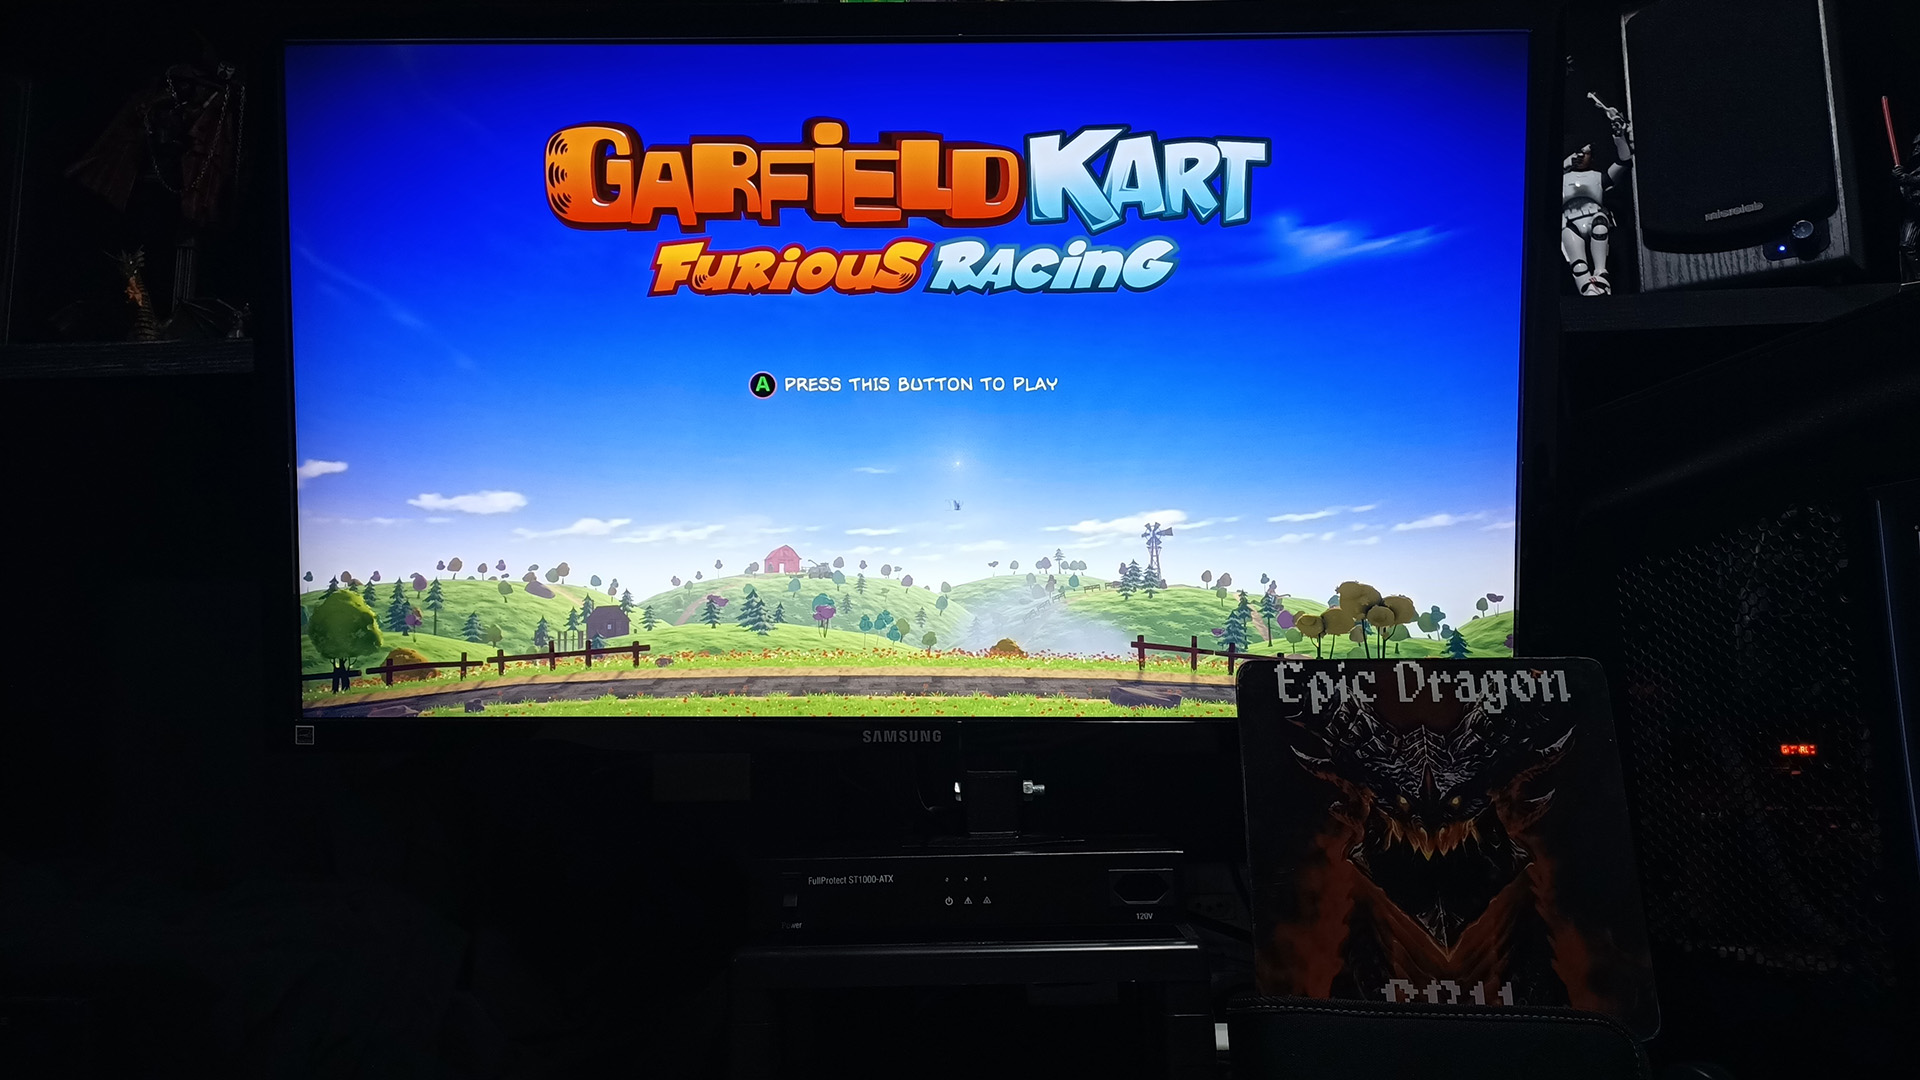 EpicDragon: Garfield Kart Furious Racing: City Slicker [Time Trial: 3 Laps] (PC) 0:02:08.238 points on 2022-08-05 17:31:03